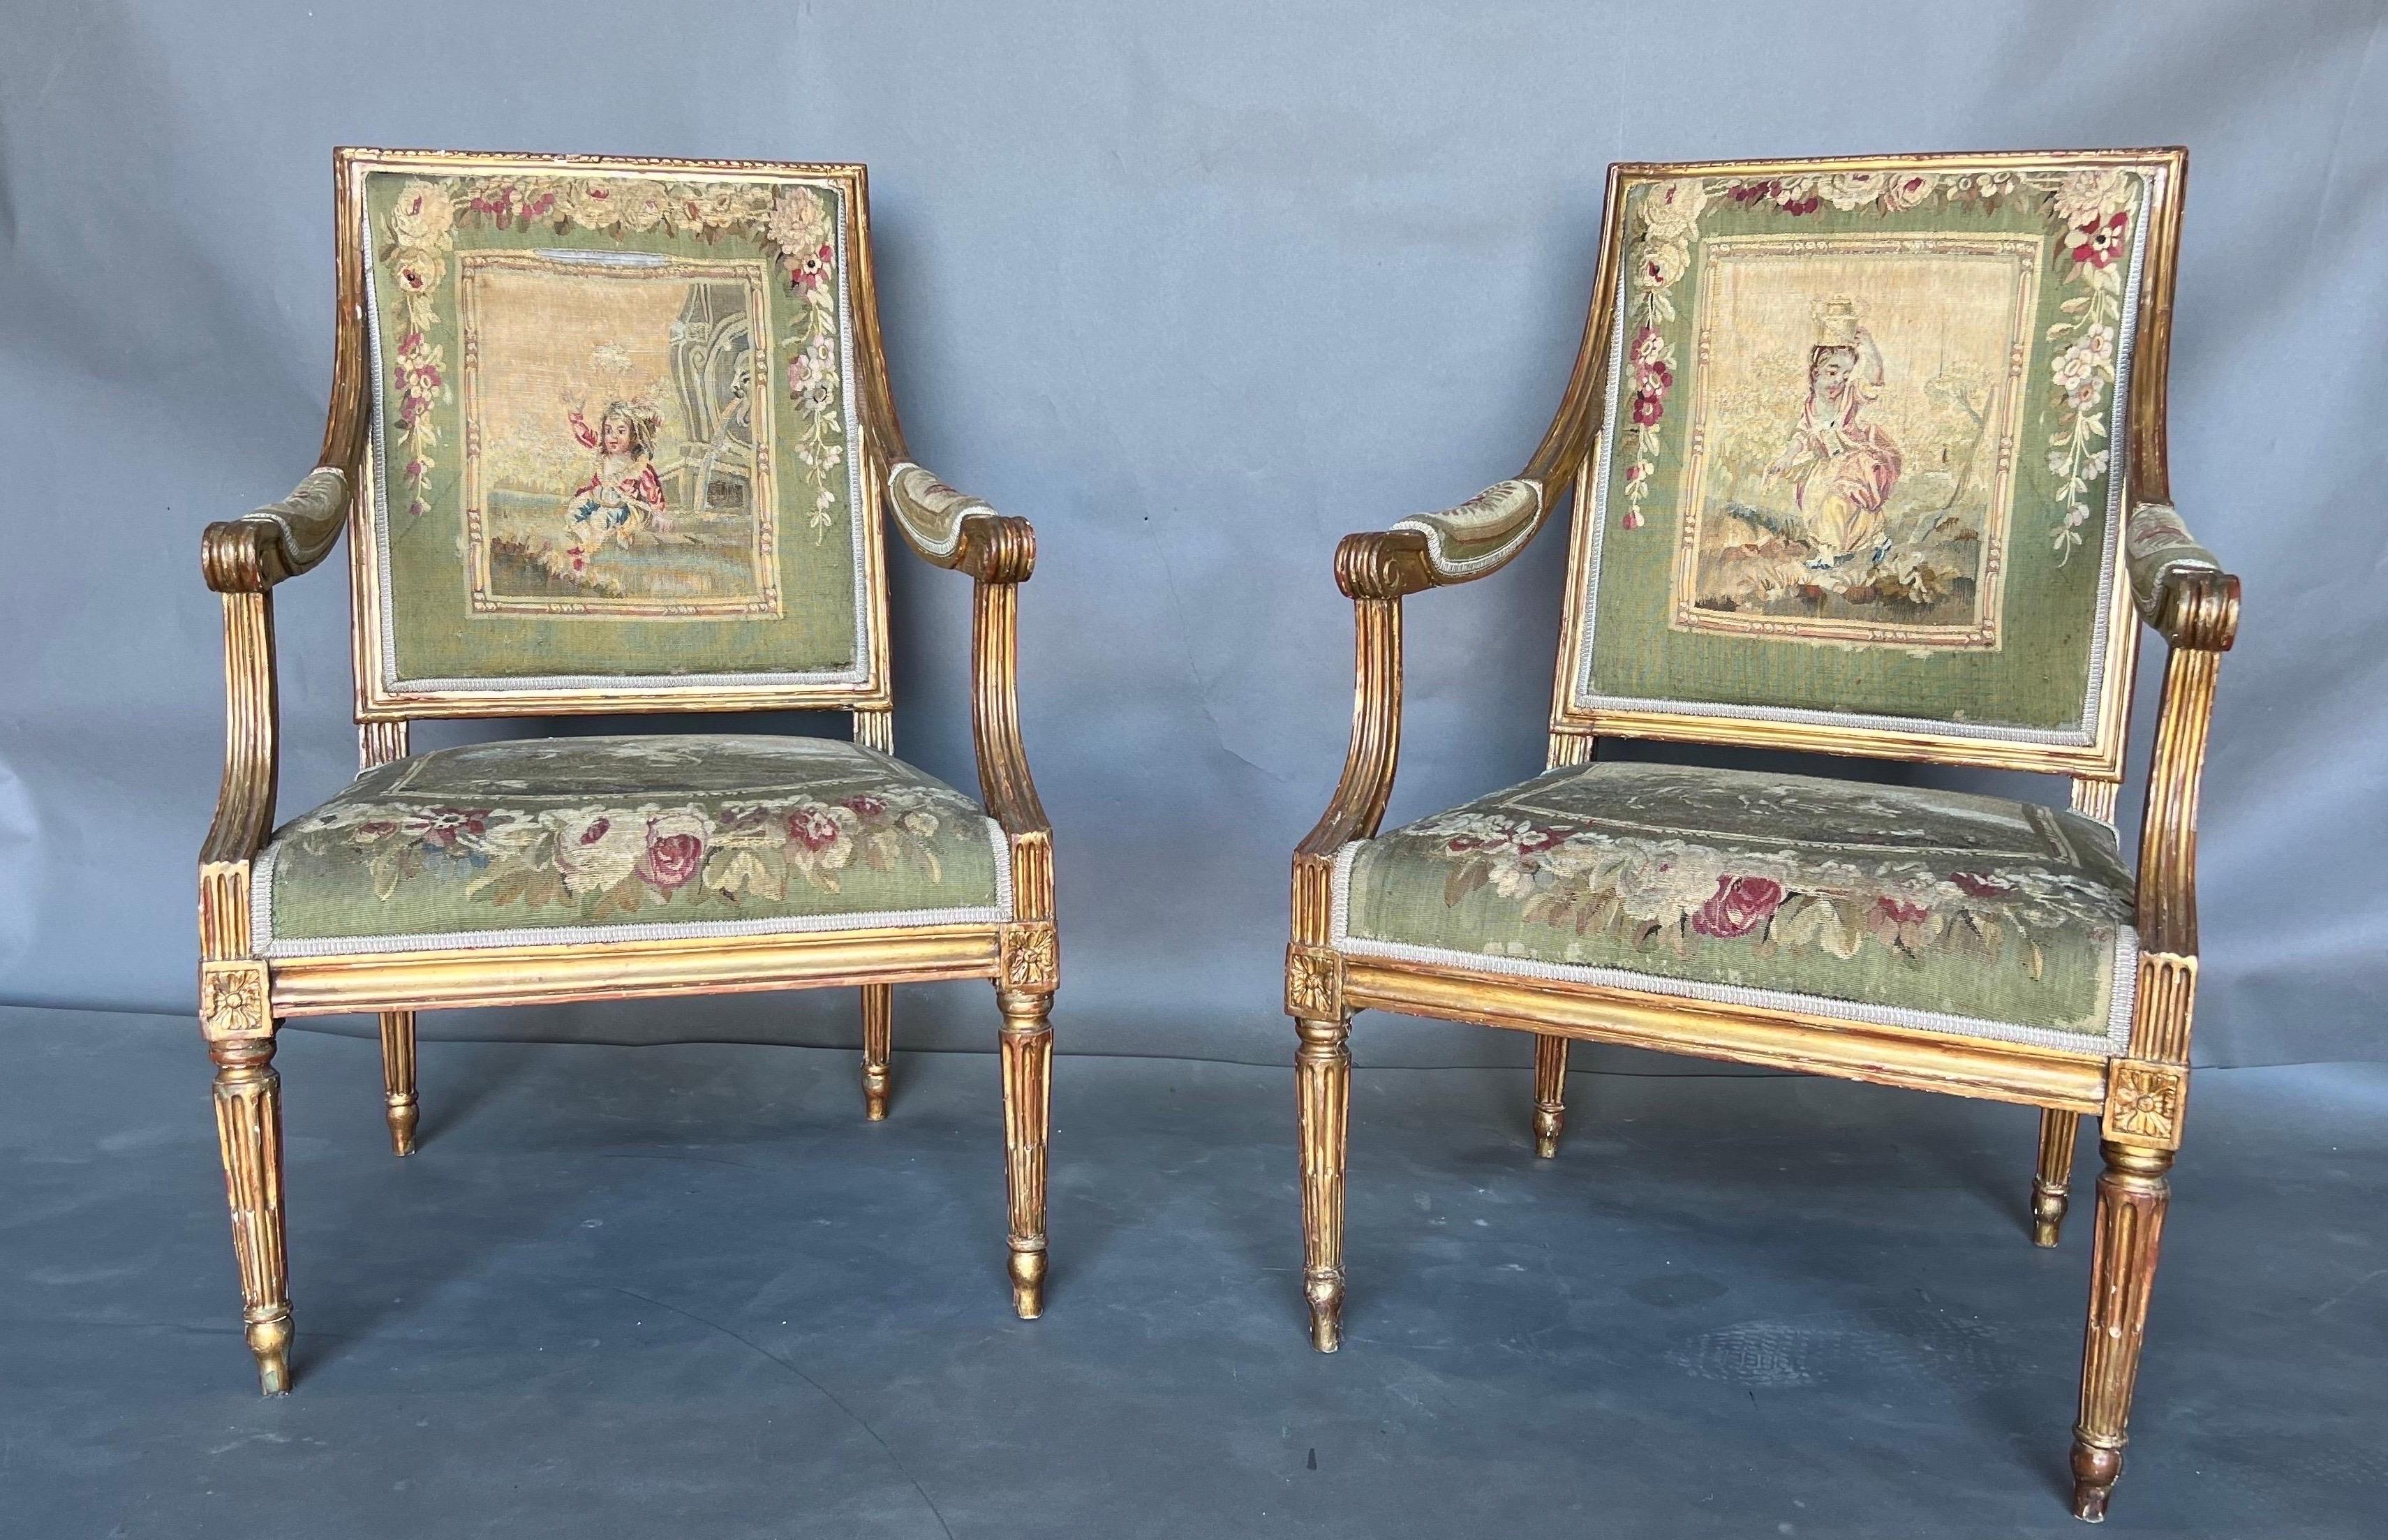 Very fine pair of 18th Century French Fauteuils covered in aubusson tapestry from an incredible home in the Carlyle Hotel, NYC.